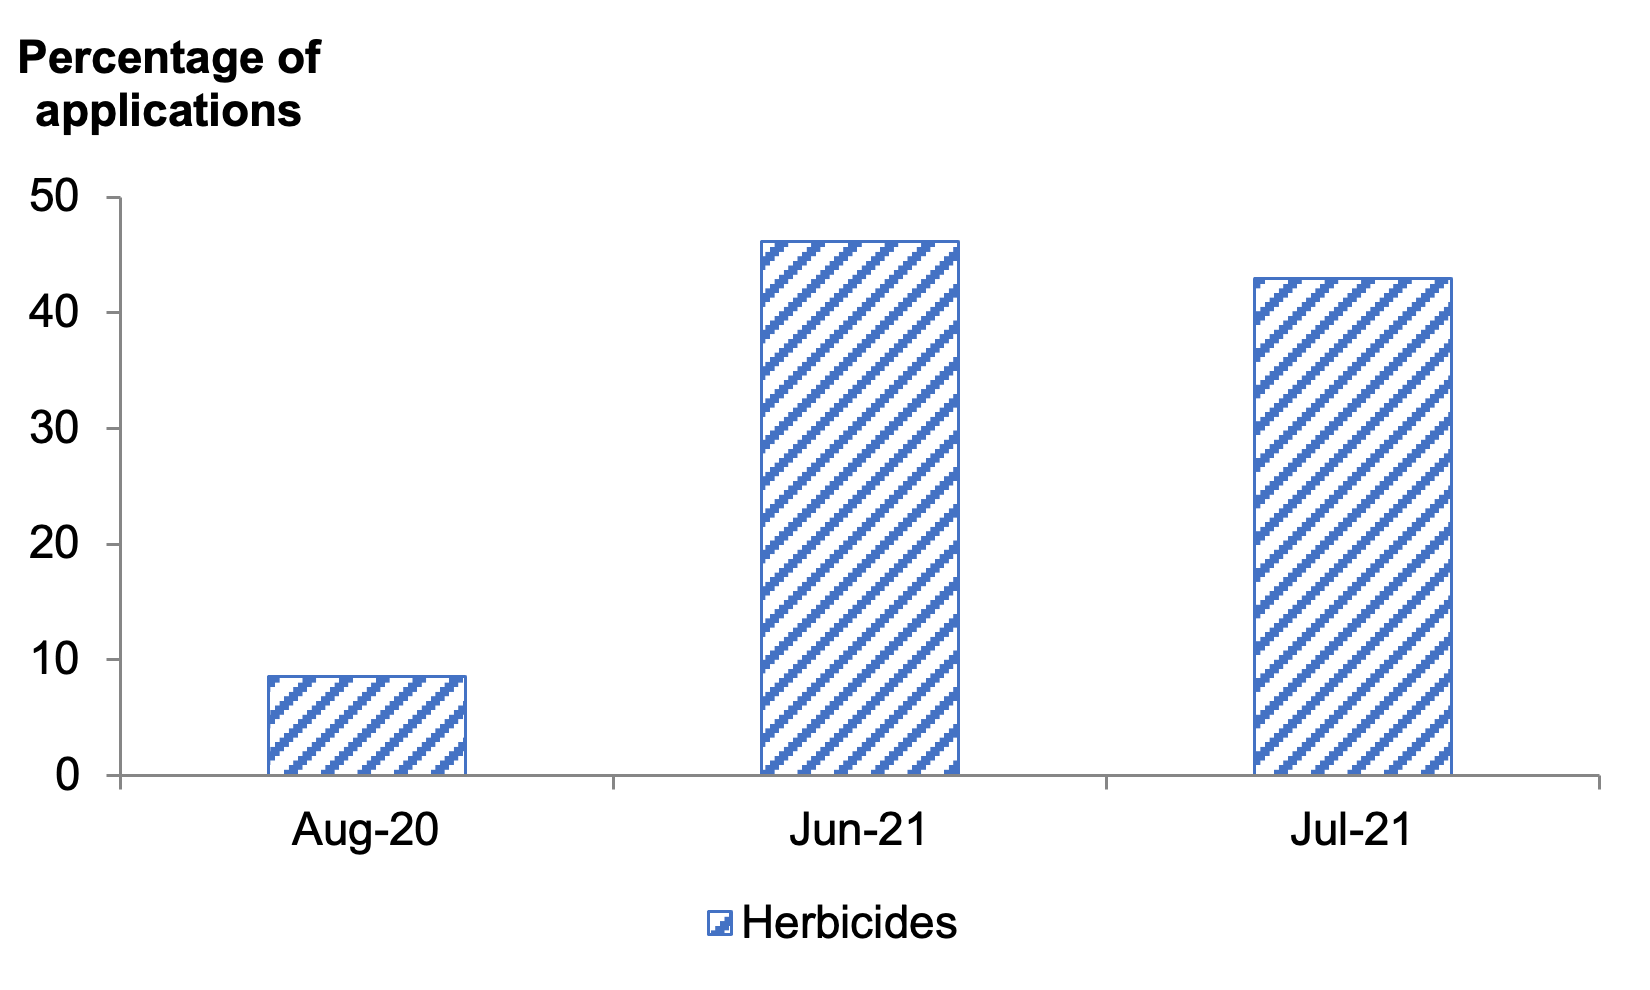 Bar chart of percentage of pesticide applications (all herbicides) on rough grazing by month where most applications are in June 2021.